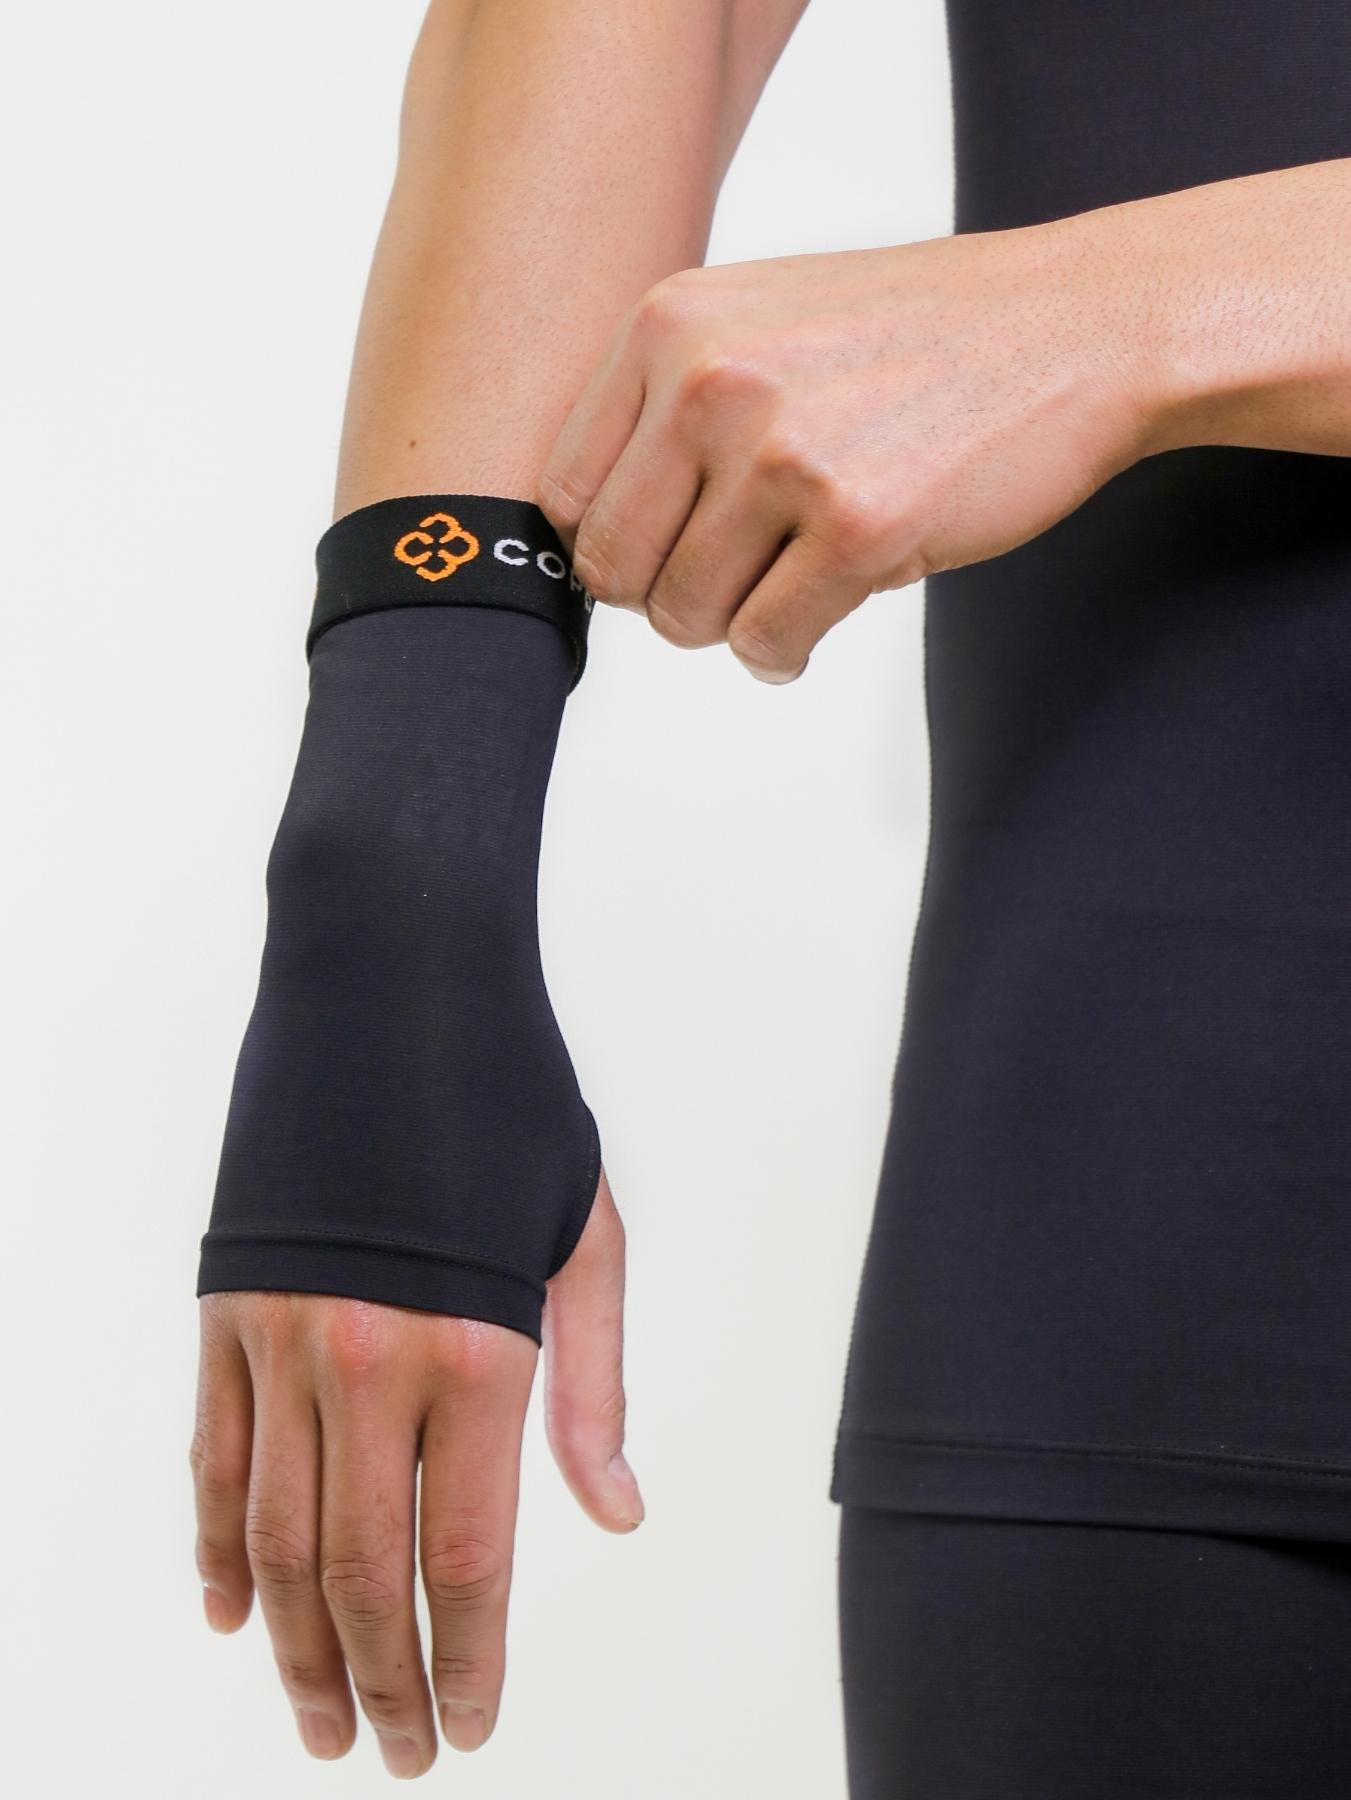 Copper Joe Carpal Tunnel Wrist Brace for Day and Night Support|Compression  Wrist Sleeve For Arthritis, Tendonitis, RSI and Sprain|Adjustable Wrist